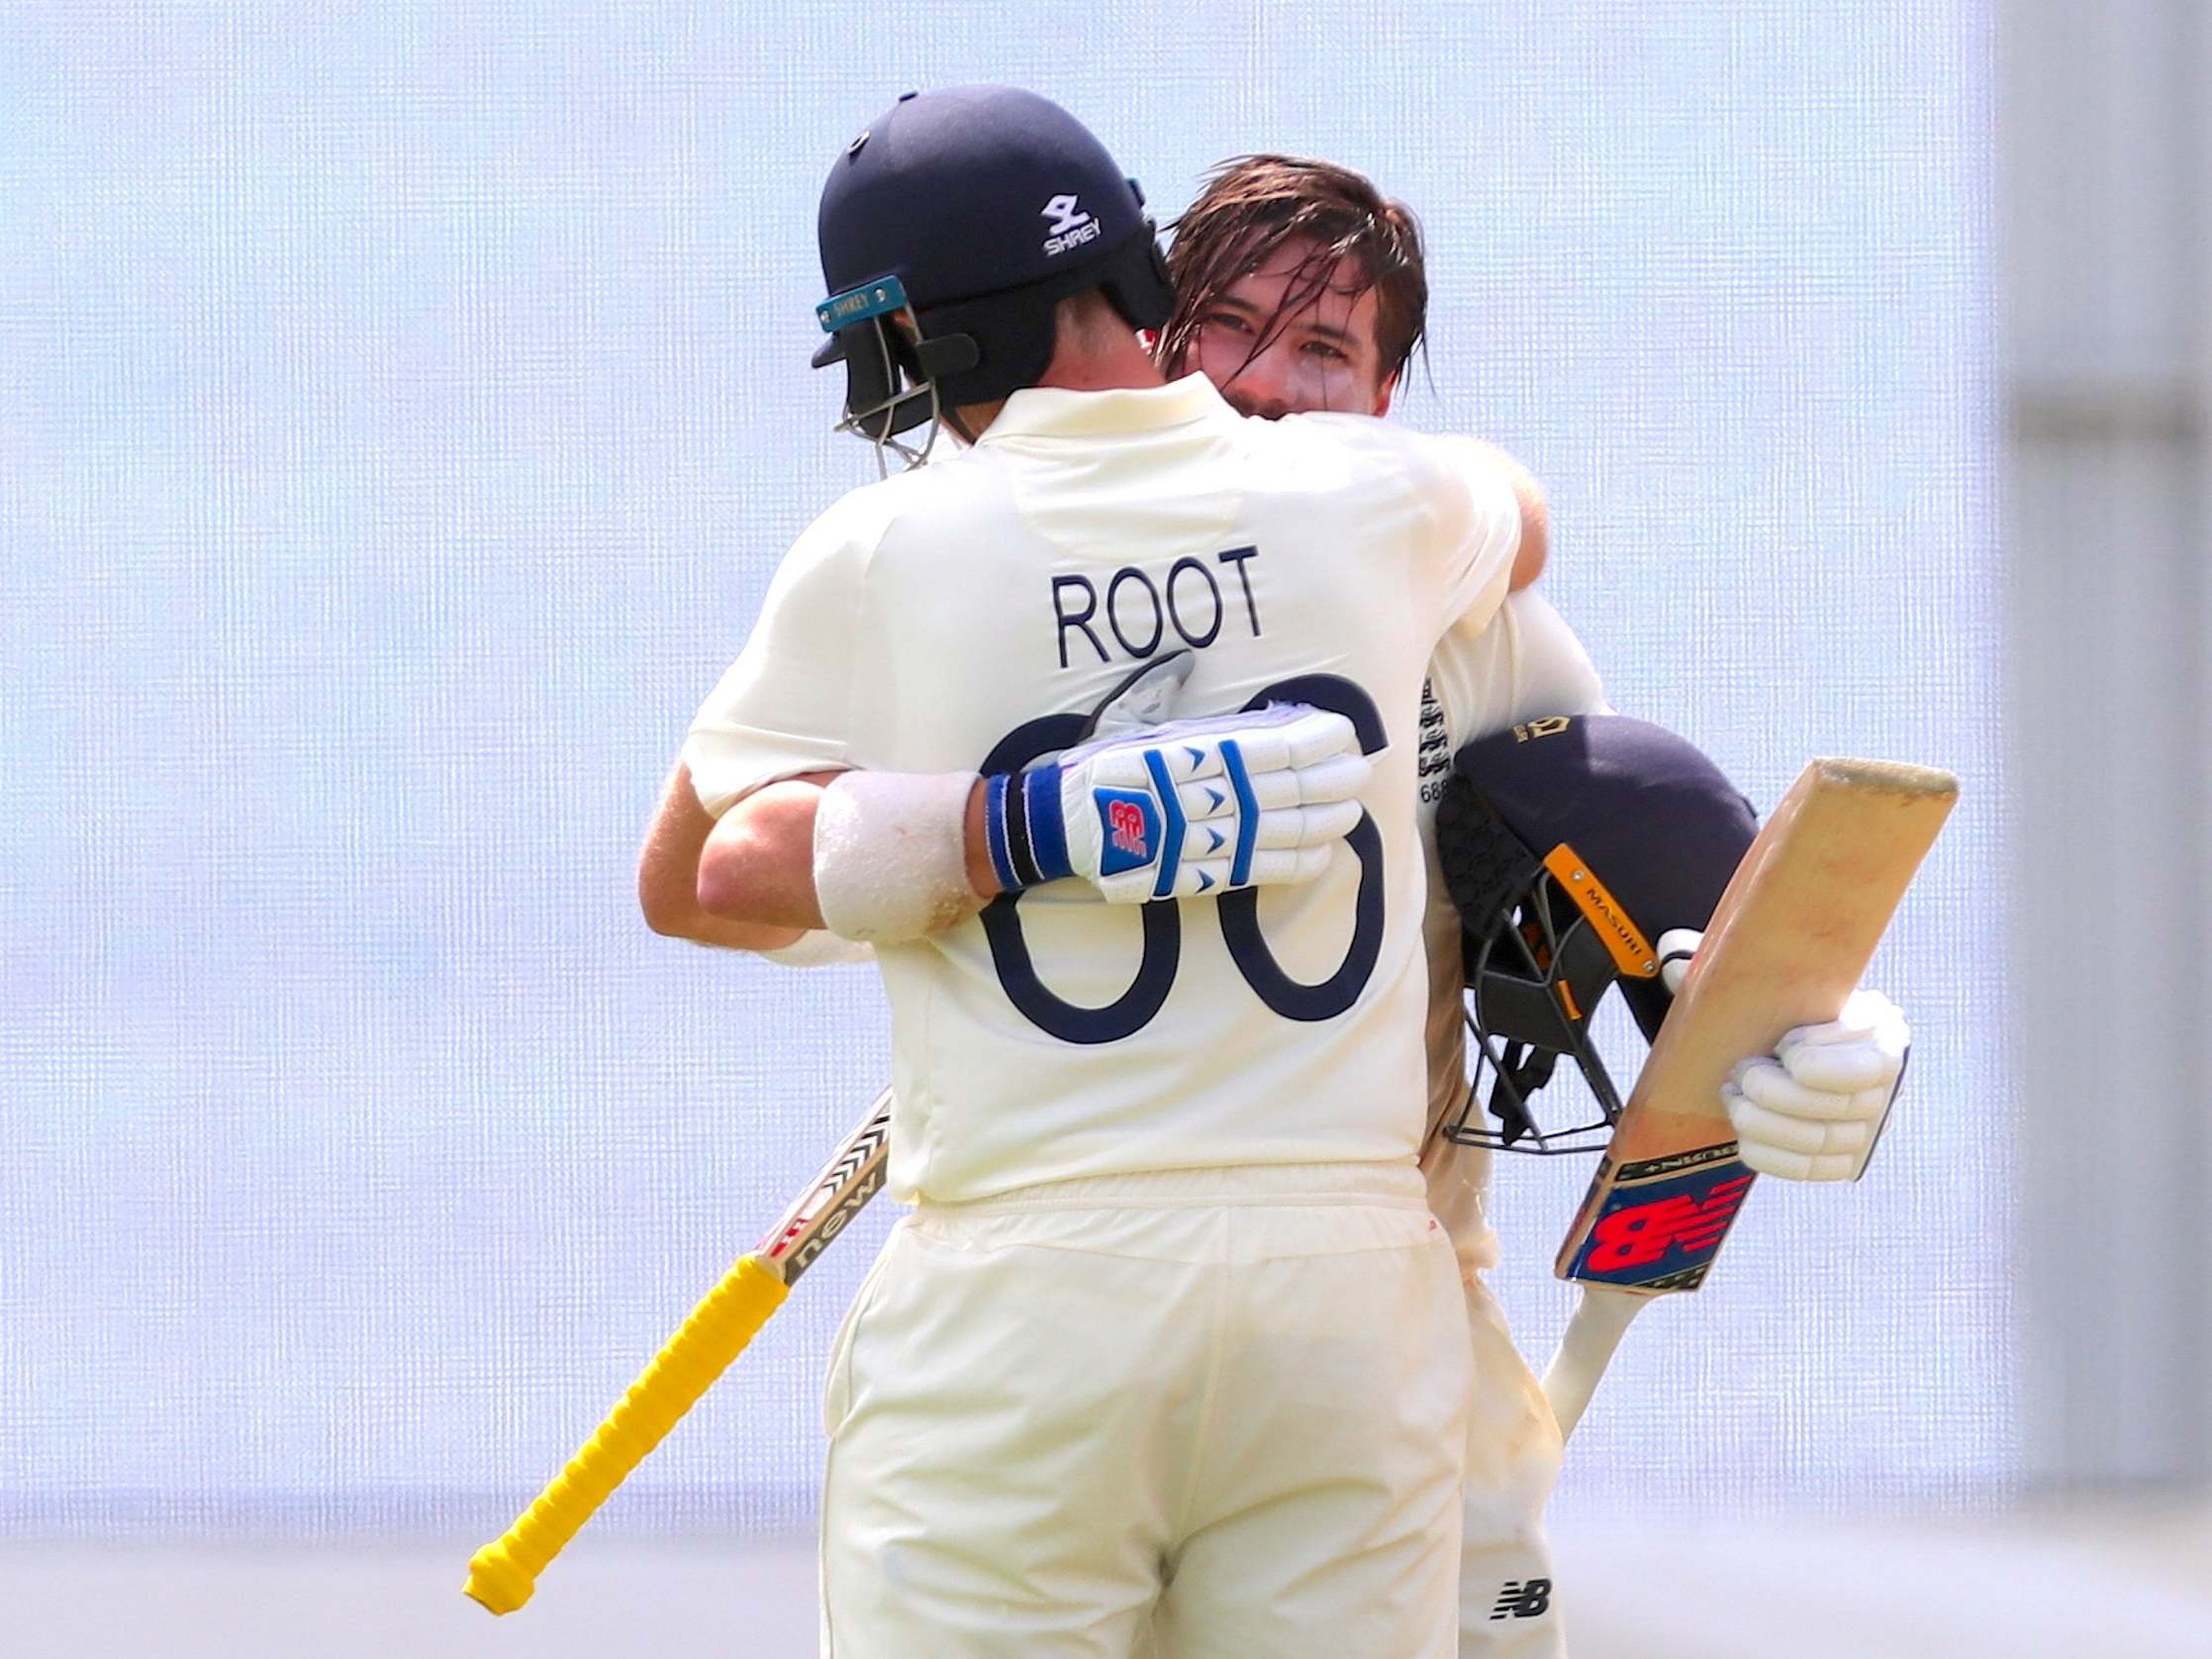 Burns joined Root in passing three figures